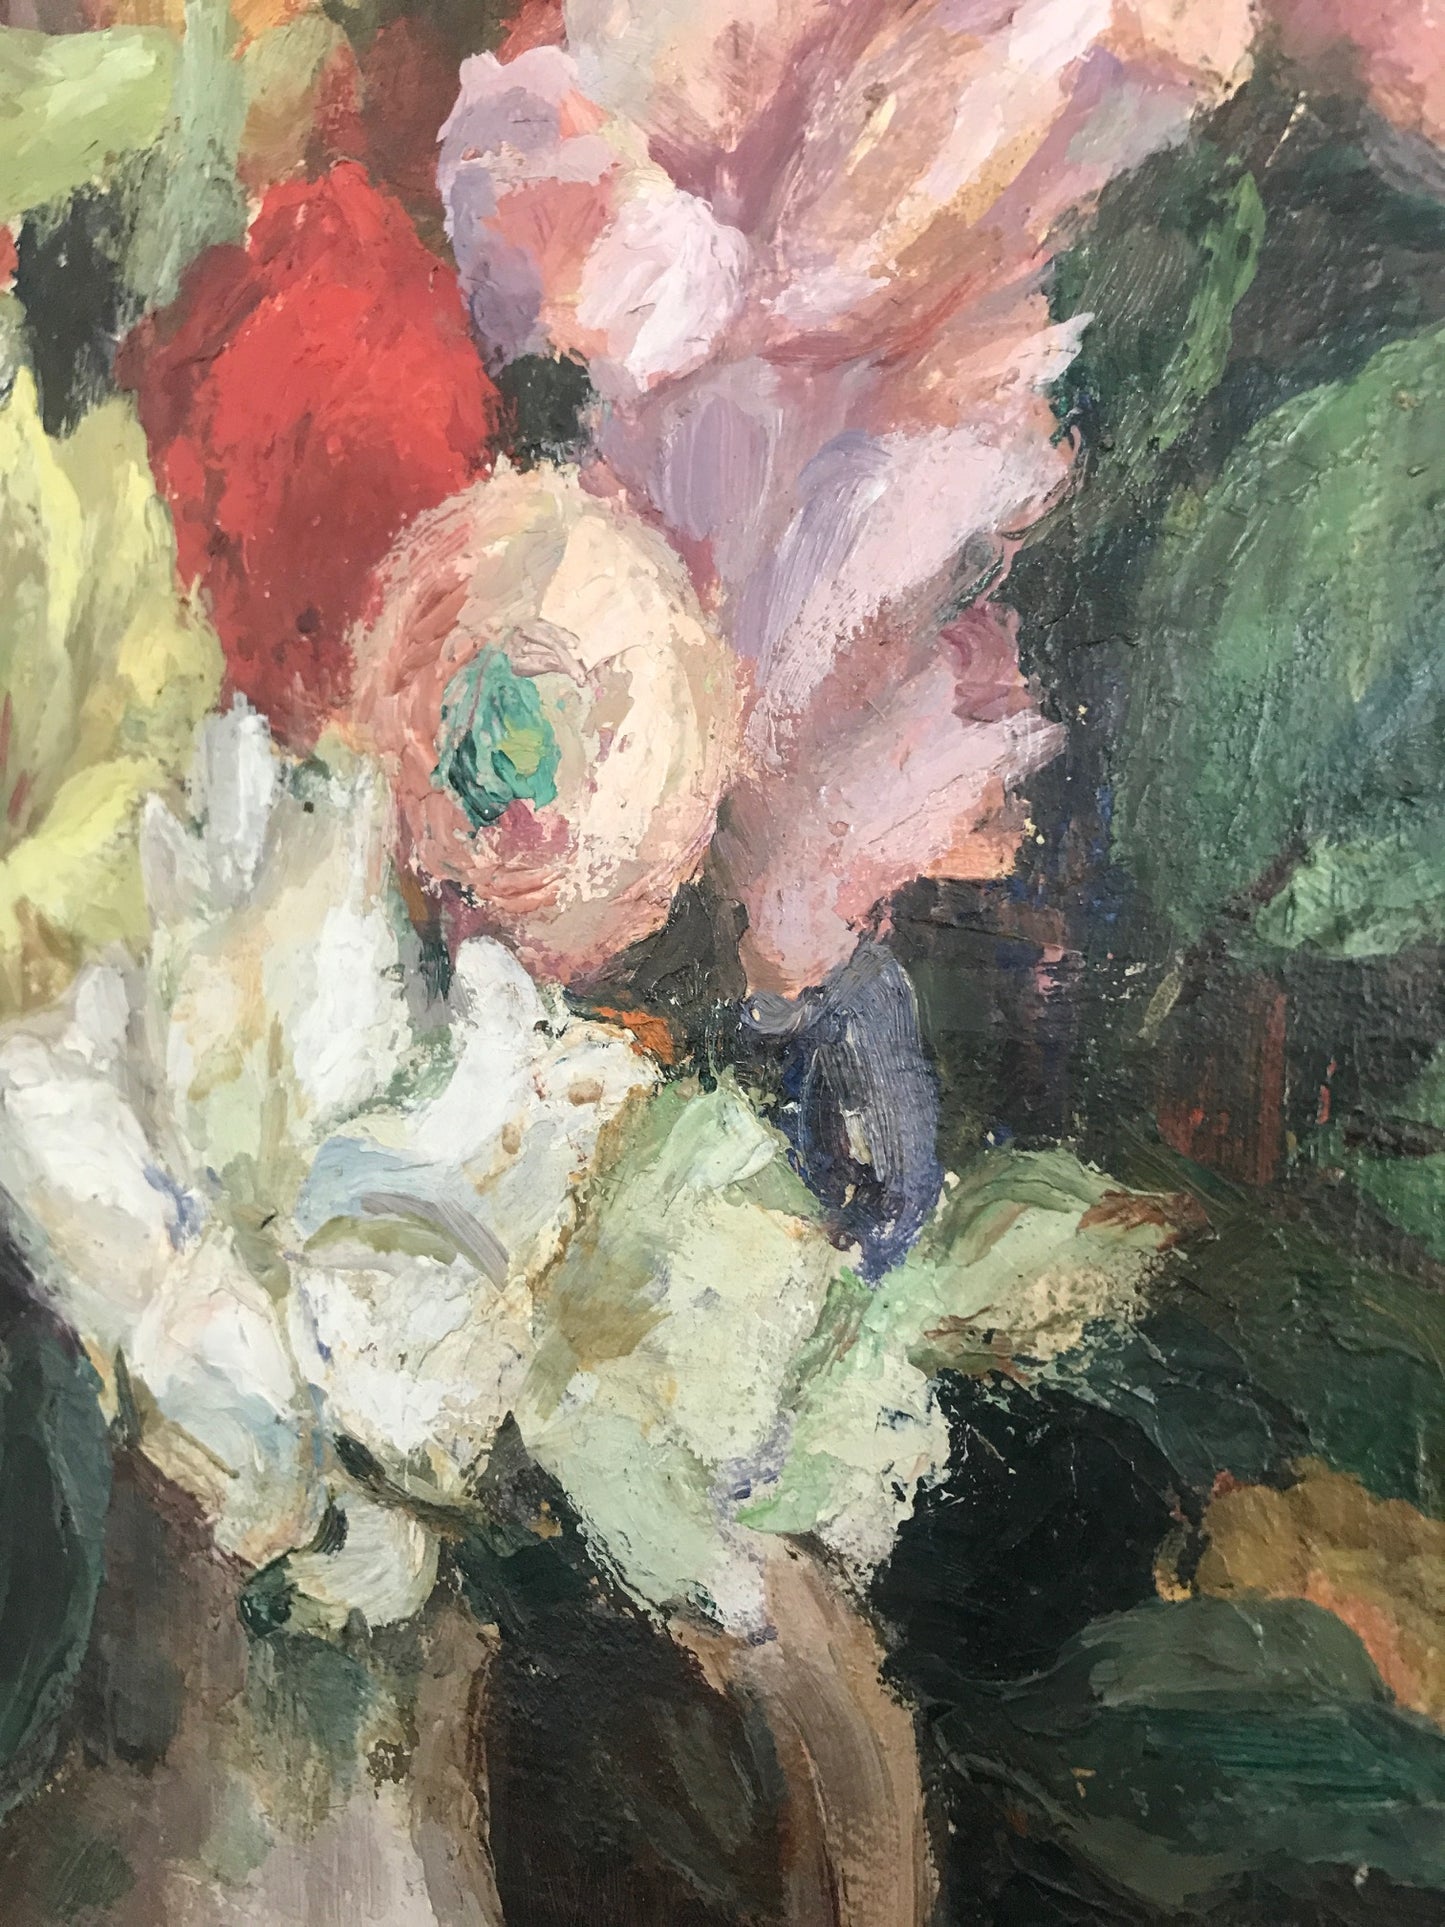 Large French Floral Oil on Canvas